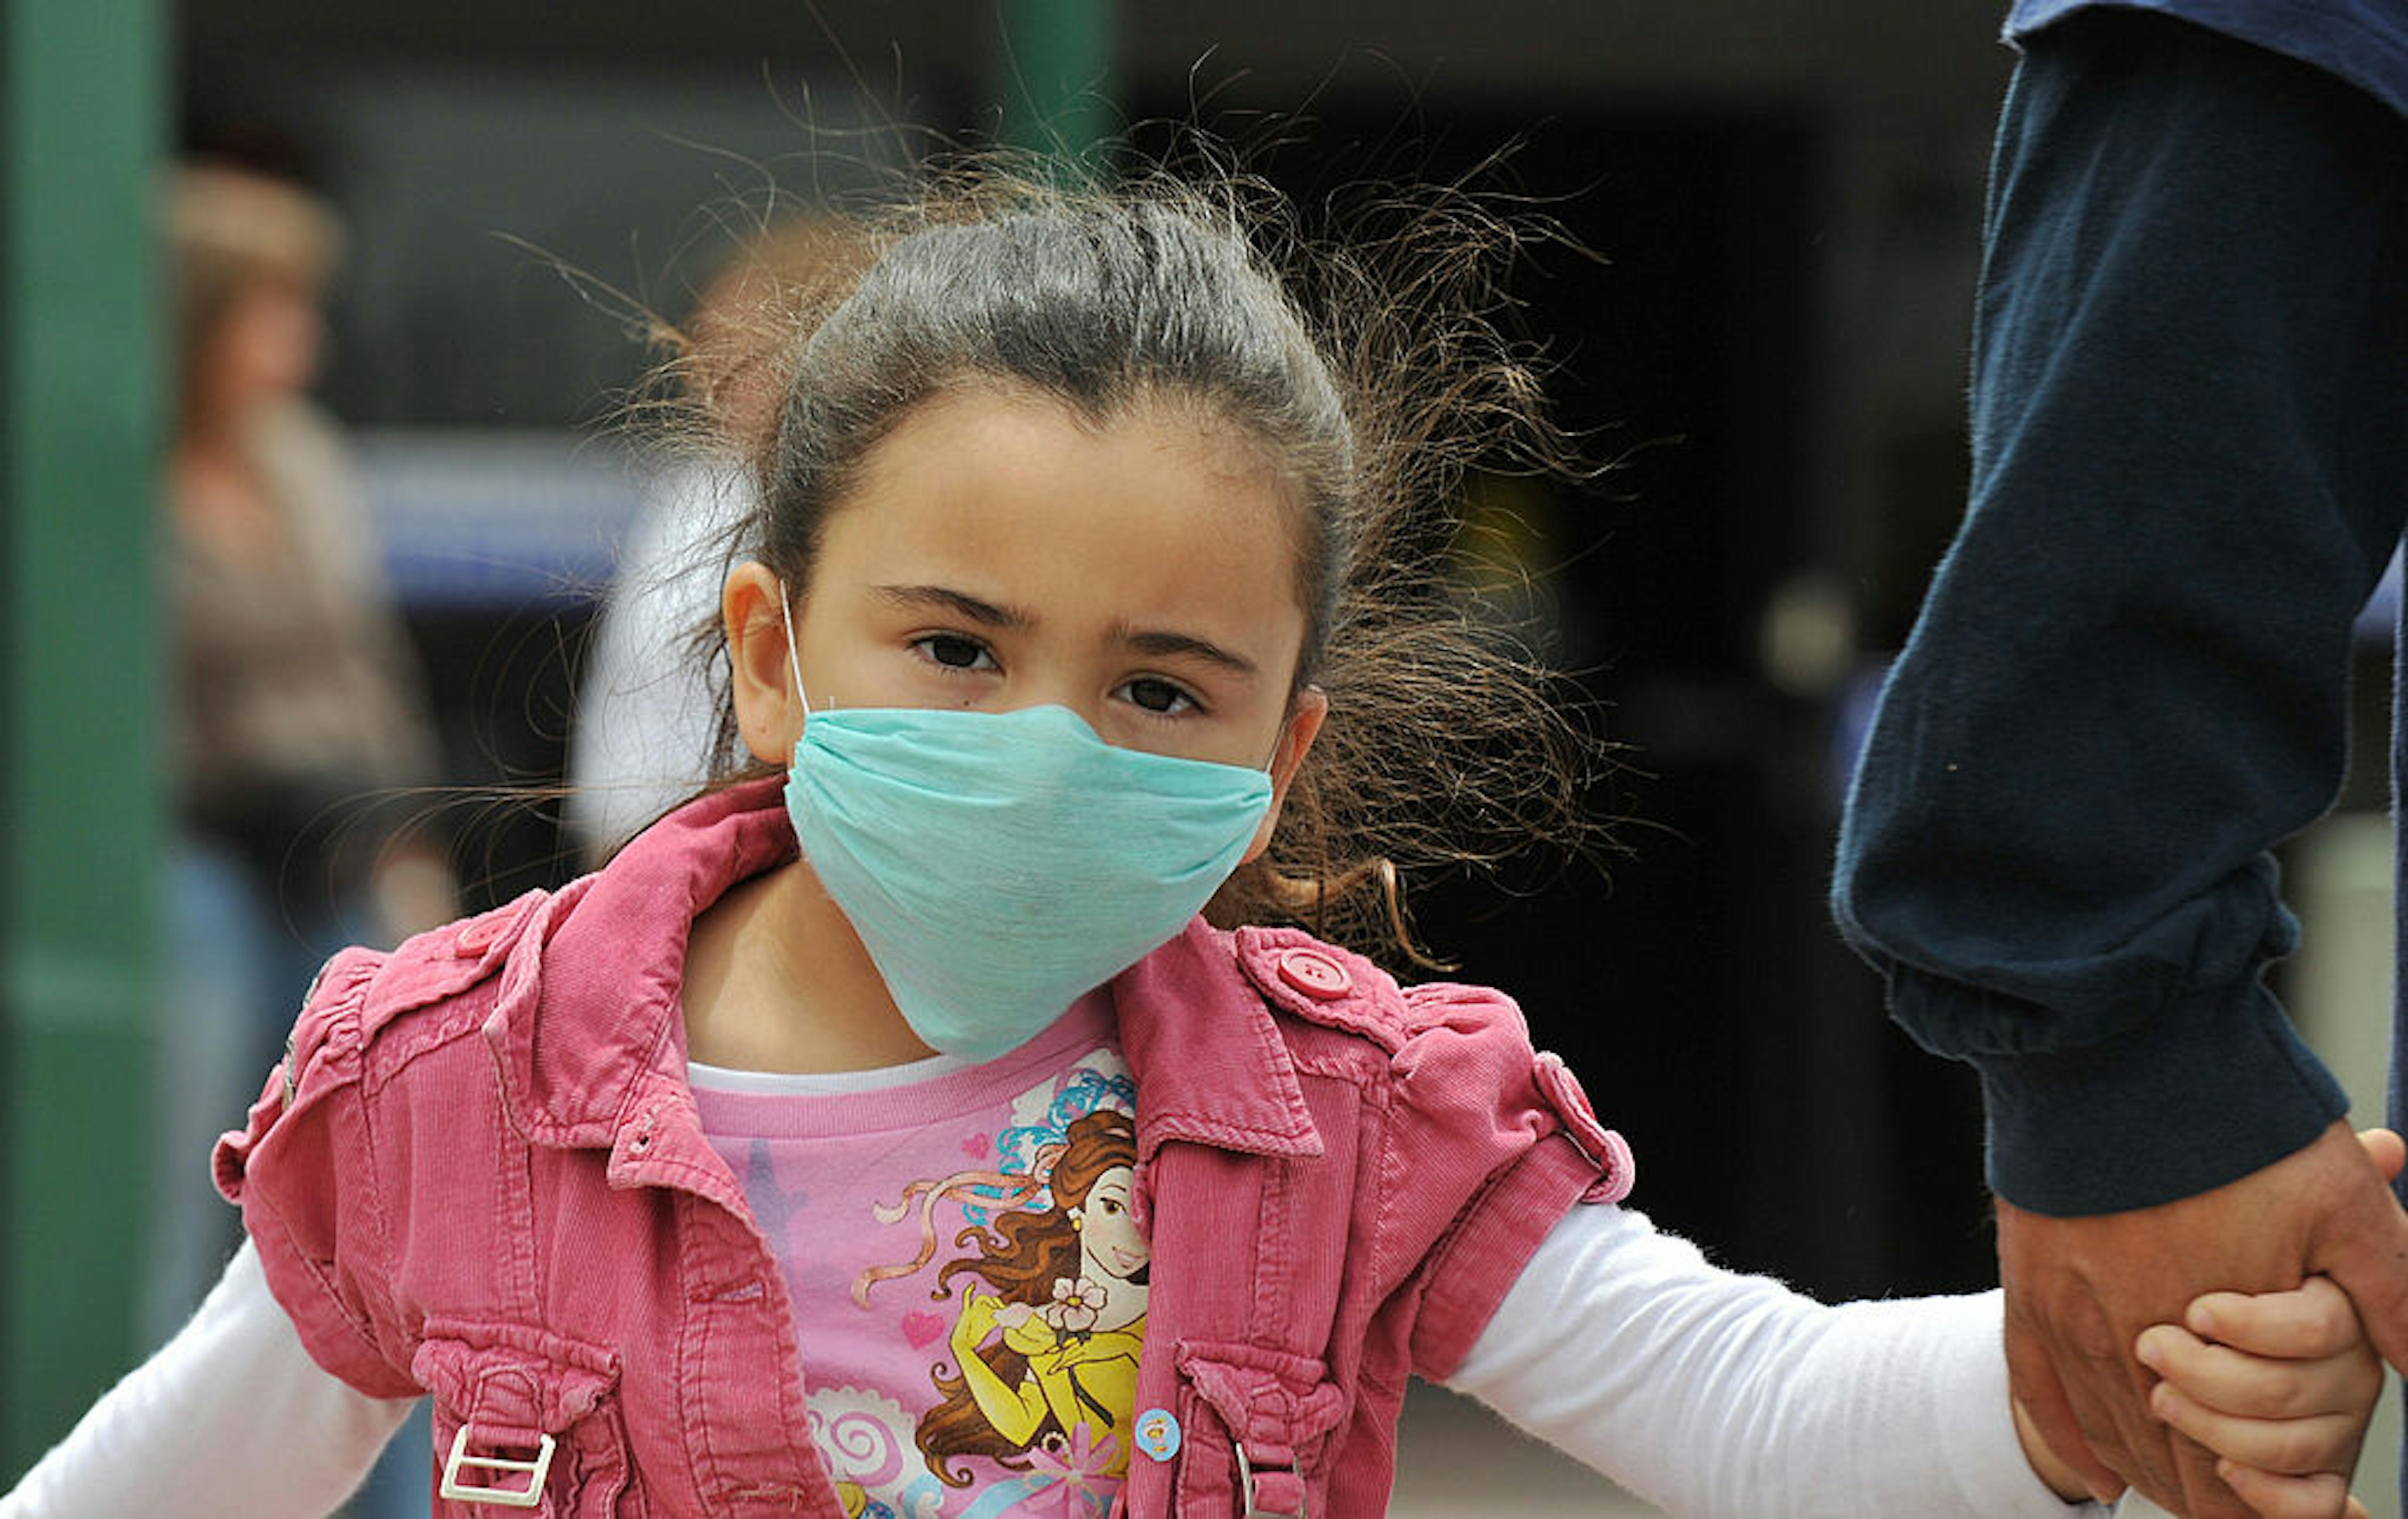 A girl, wearing a mask, holds her father's hand as they cross the international border between US and Mexico in San Ysidro, California, on April 27, 2009. The World Health Organization (WHO) raised its flu pandemic alert level from three to four, signalling a "significant increase in risk of a pandemic." The number of confirmed cases in the United States doubled to 40 on Monday, while Britain and Spain recorded their first swine flu victims. Mexico said the number of confirmed and suspected deaths from the flu had risen to 149, while some 1,600 people were thought to be infected. AFP PHOTO/Jewel SAMAD (Photo credit should read JEWEL SAMAD/AFP via Getty Images)